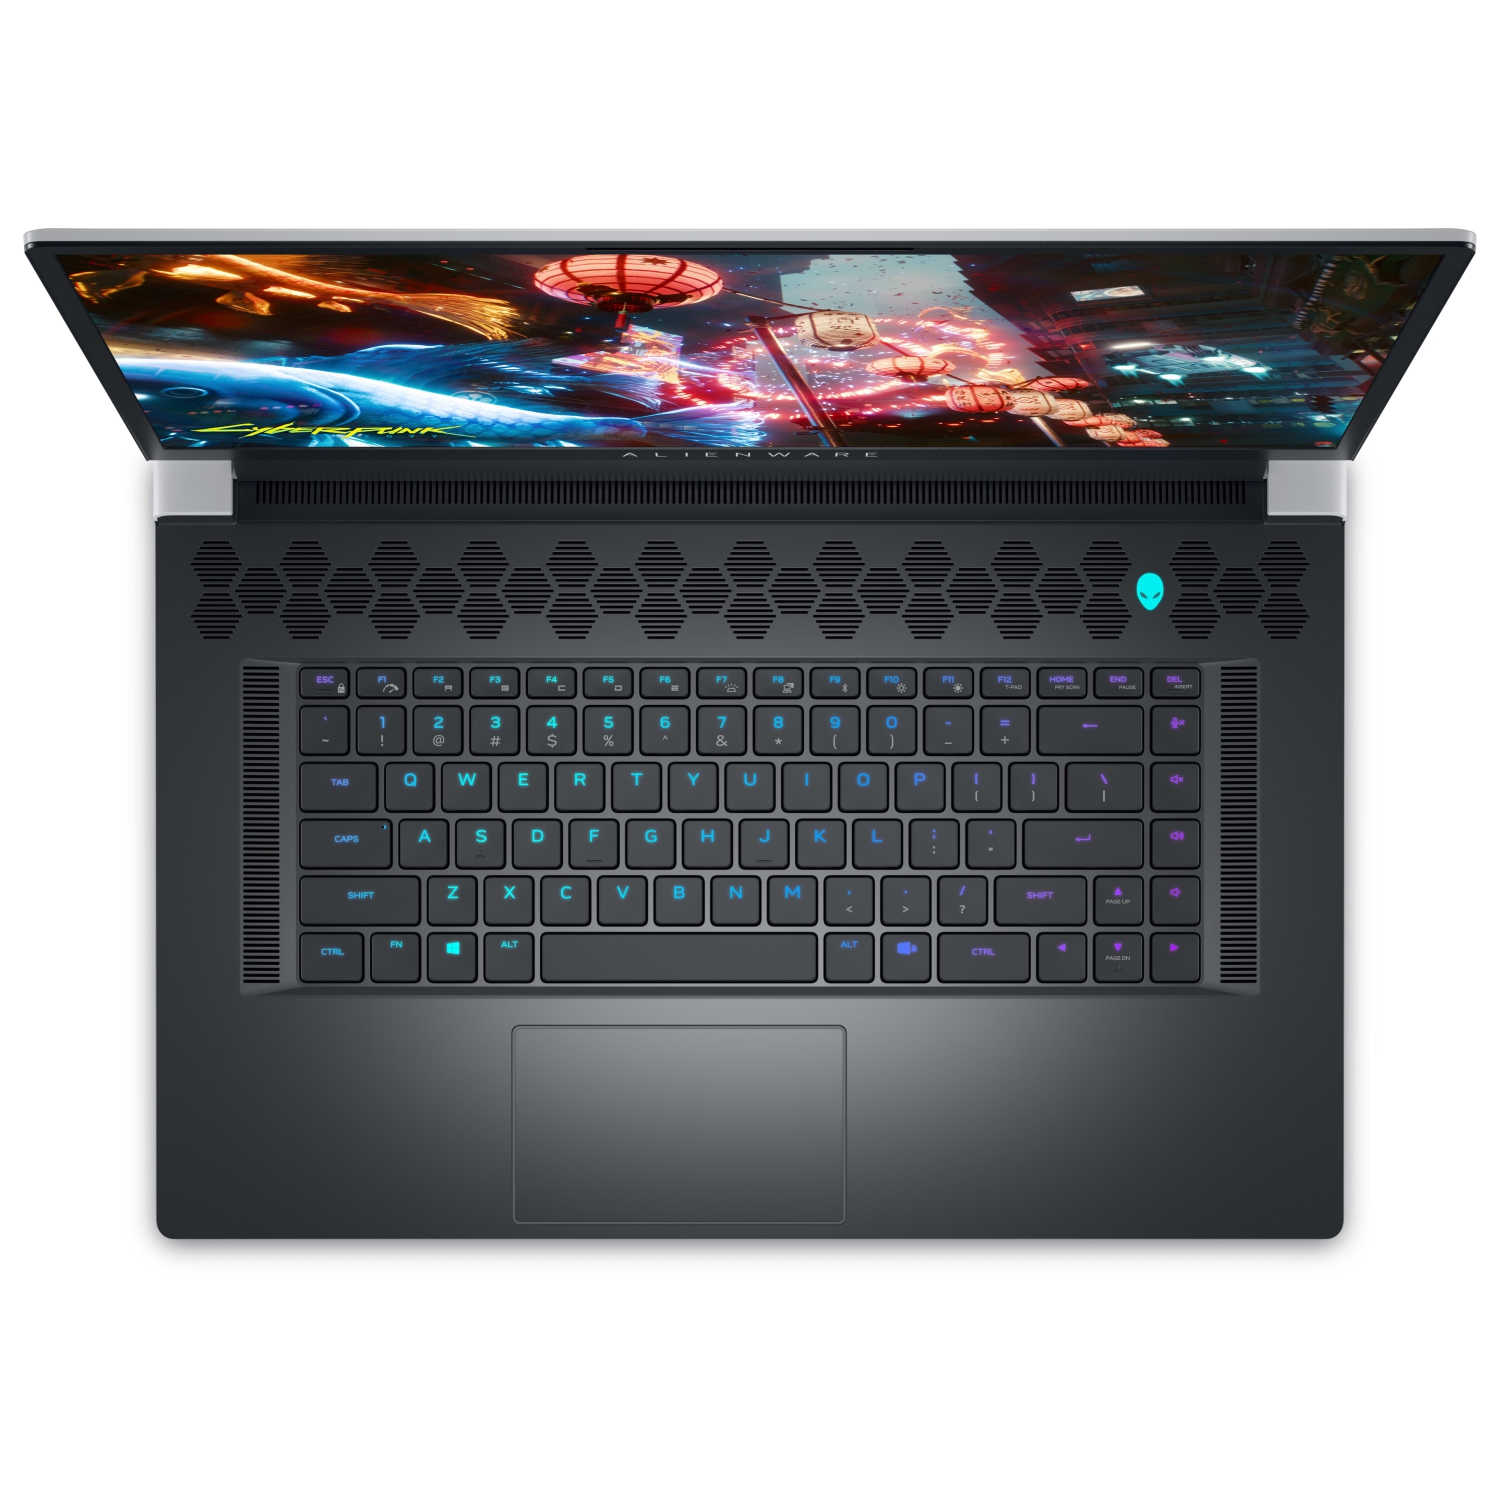 Refurbished (Excellent) – Dell Alienware X17 R2 Gaming Laptop (2022) | 17.3" FHD | Core i9 - 2TB SSD - 64GB RAM - 3080 Ti | 14 Cores @ 5 GHz - 12th Gen CPU - 12GB GDDR6X